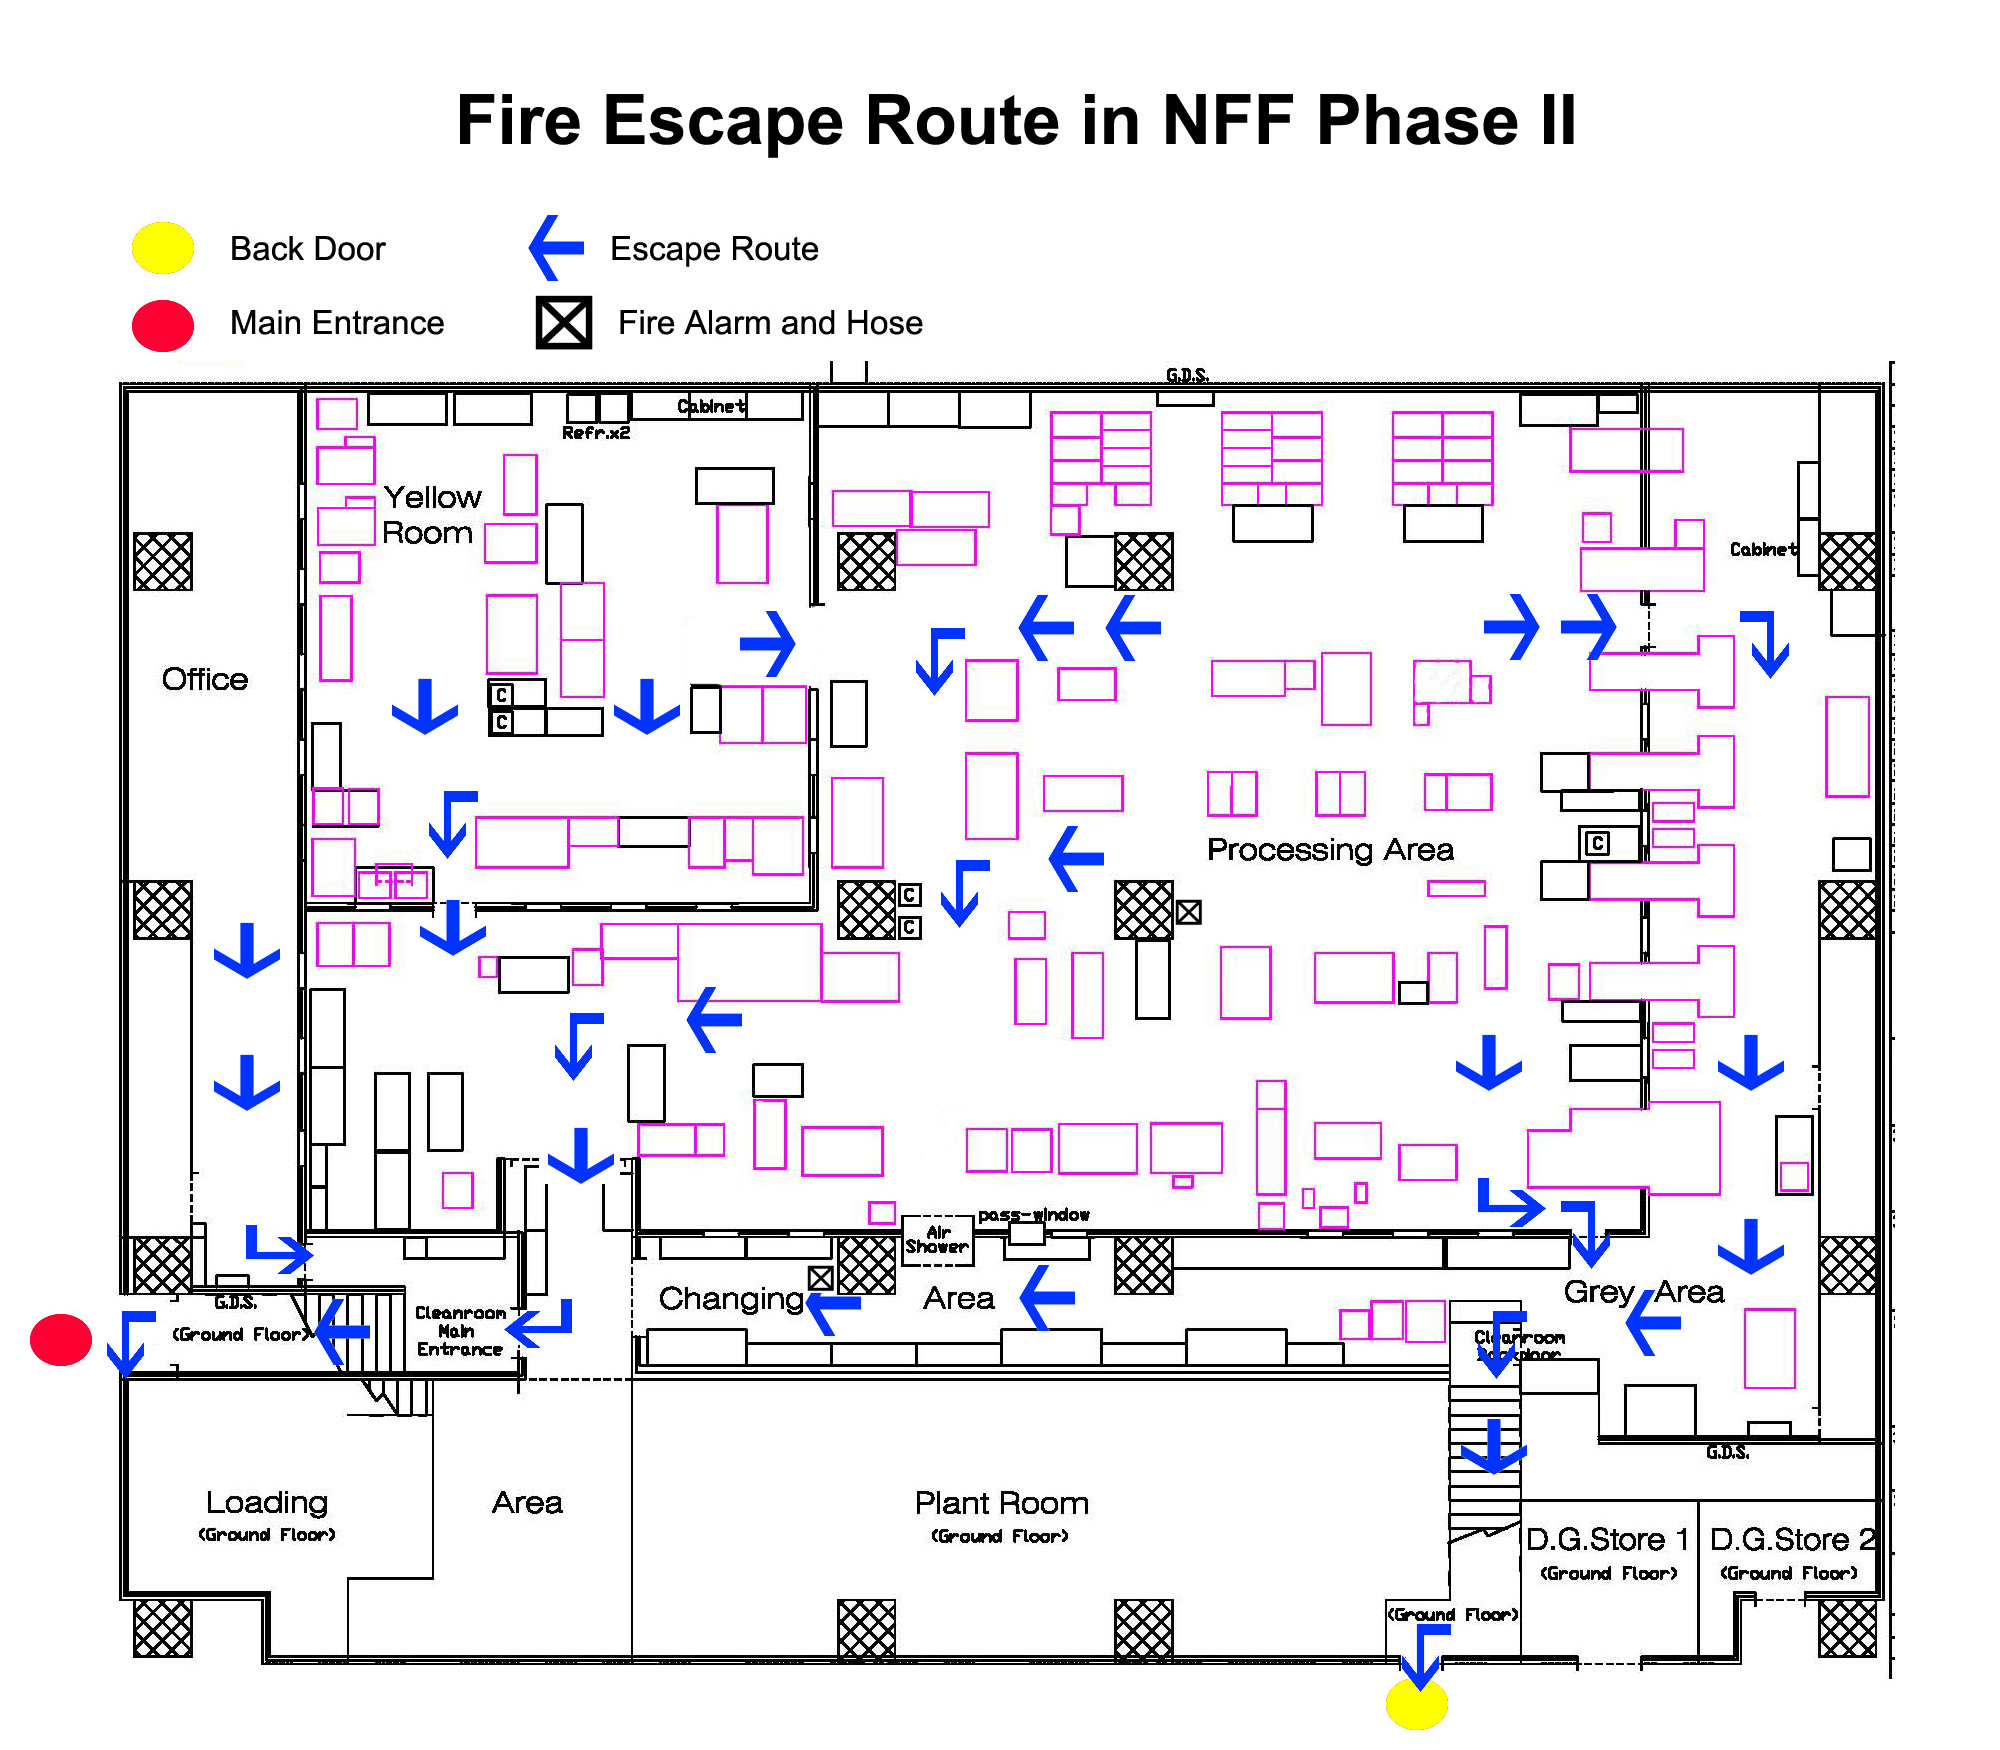 Fire Escape Route in NFF Phase II